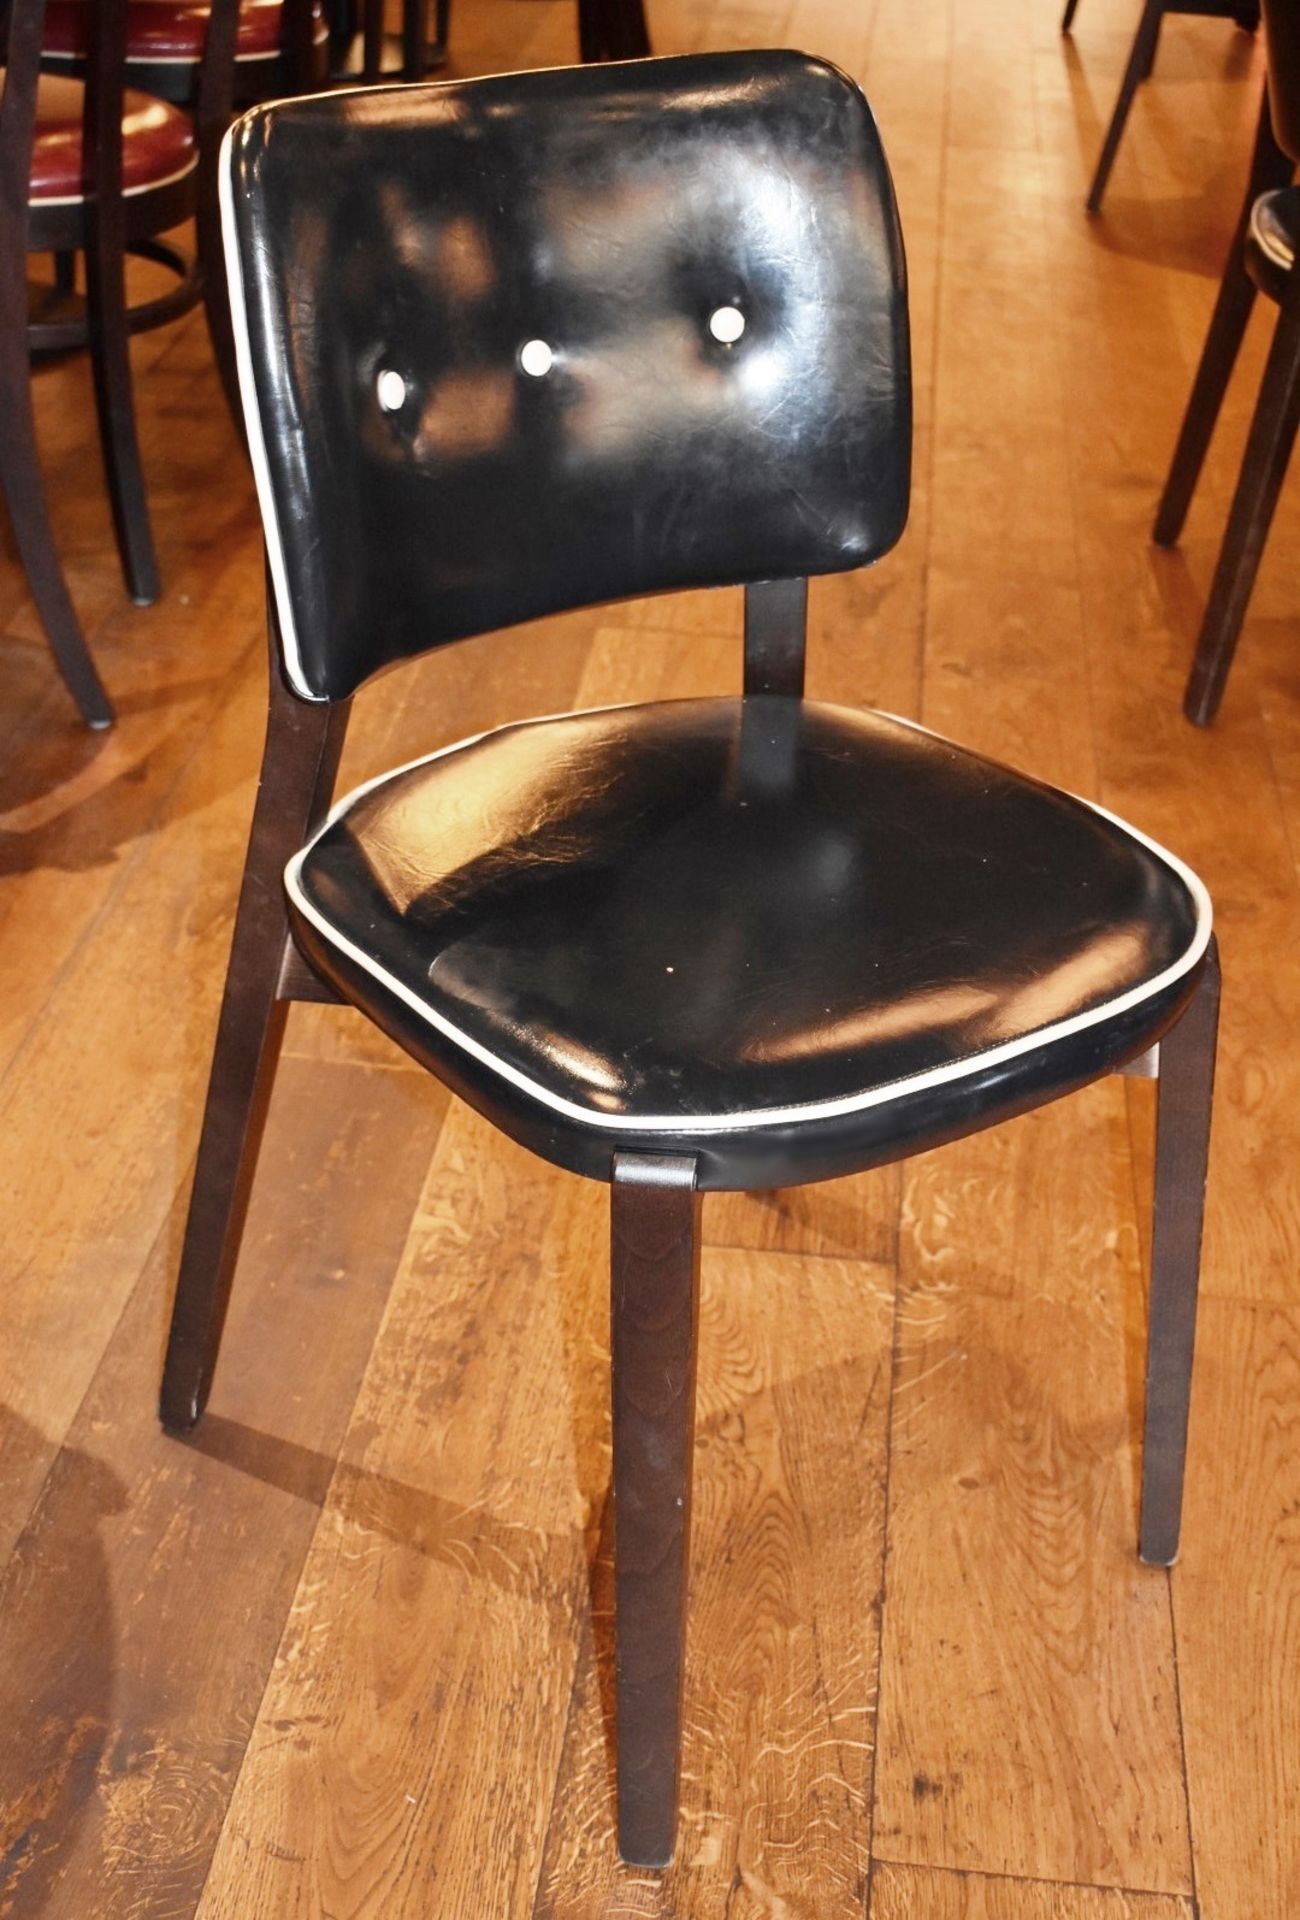 5 x Black Faux Leather Dining Chairs From Italian American Restaurant - Retro Design With Dark